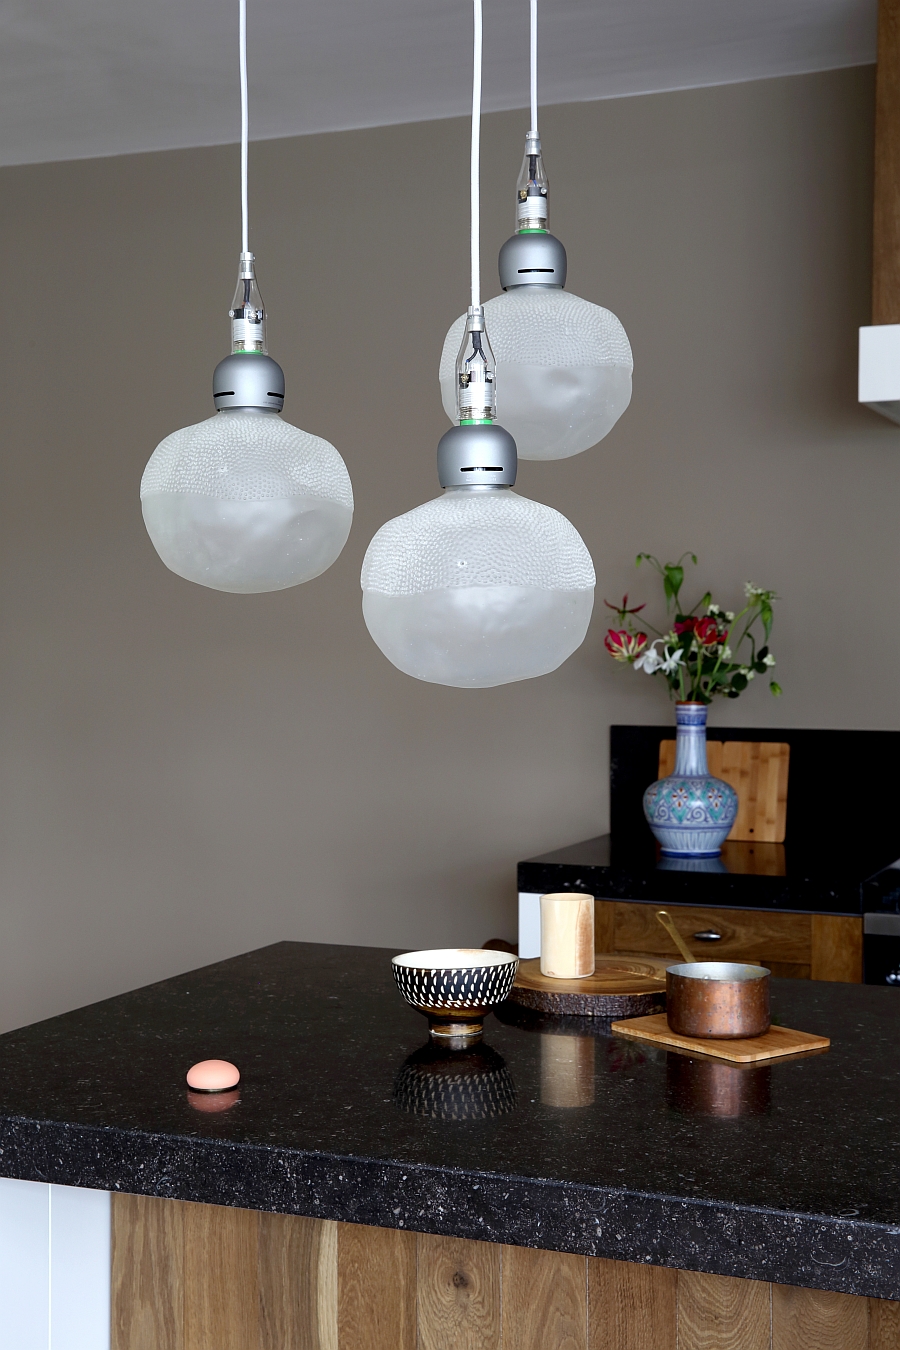 User friendly and durable rubber pendant lights from Nacho Carbonell for Booo